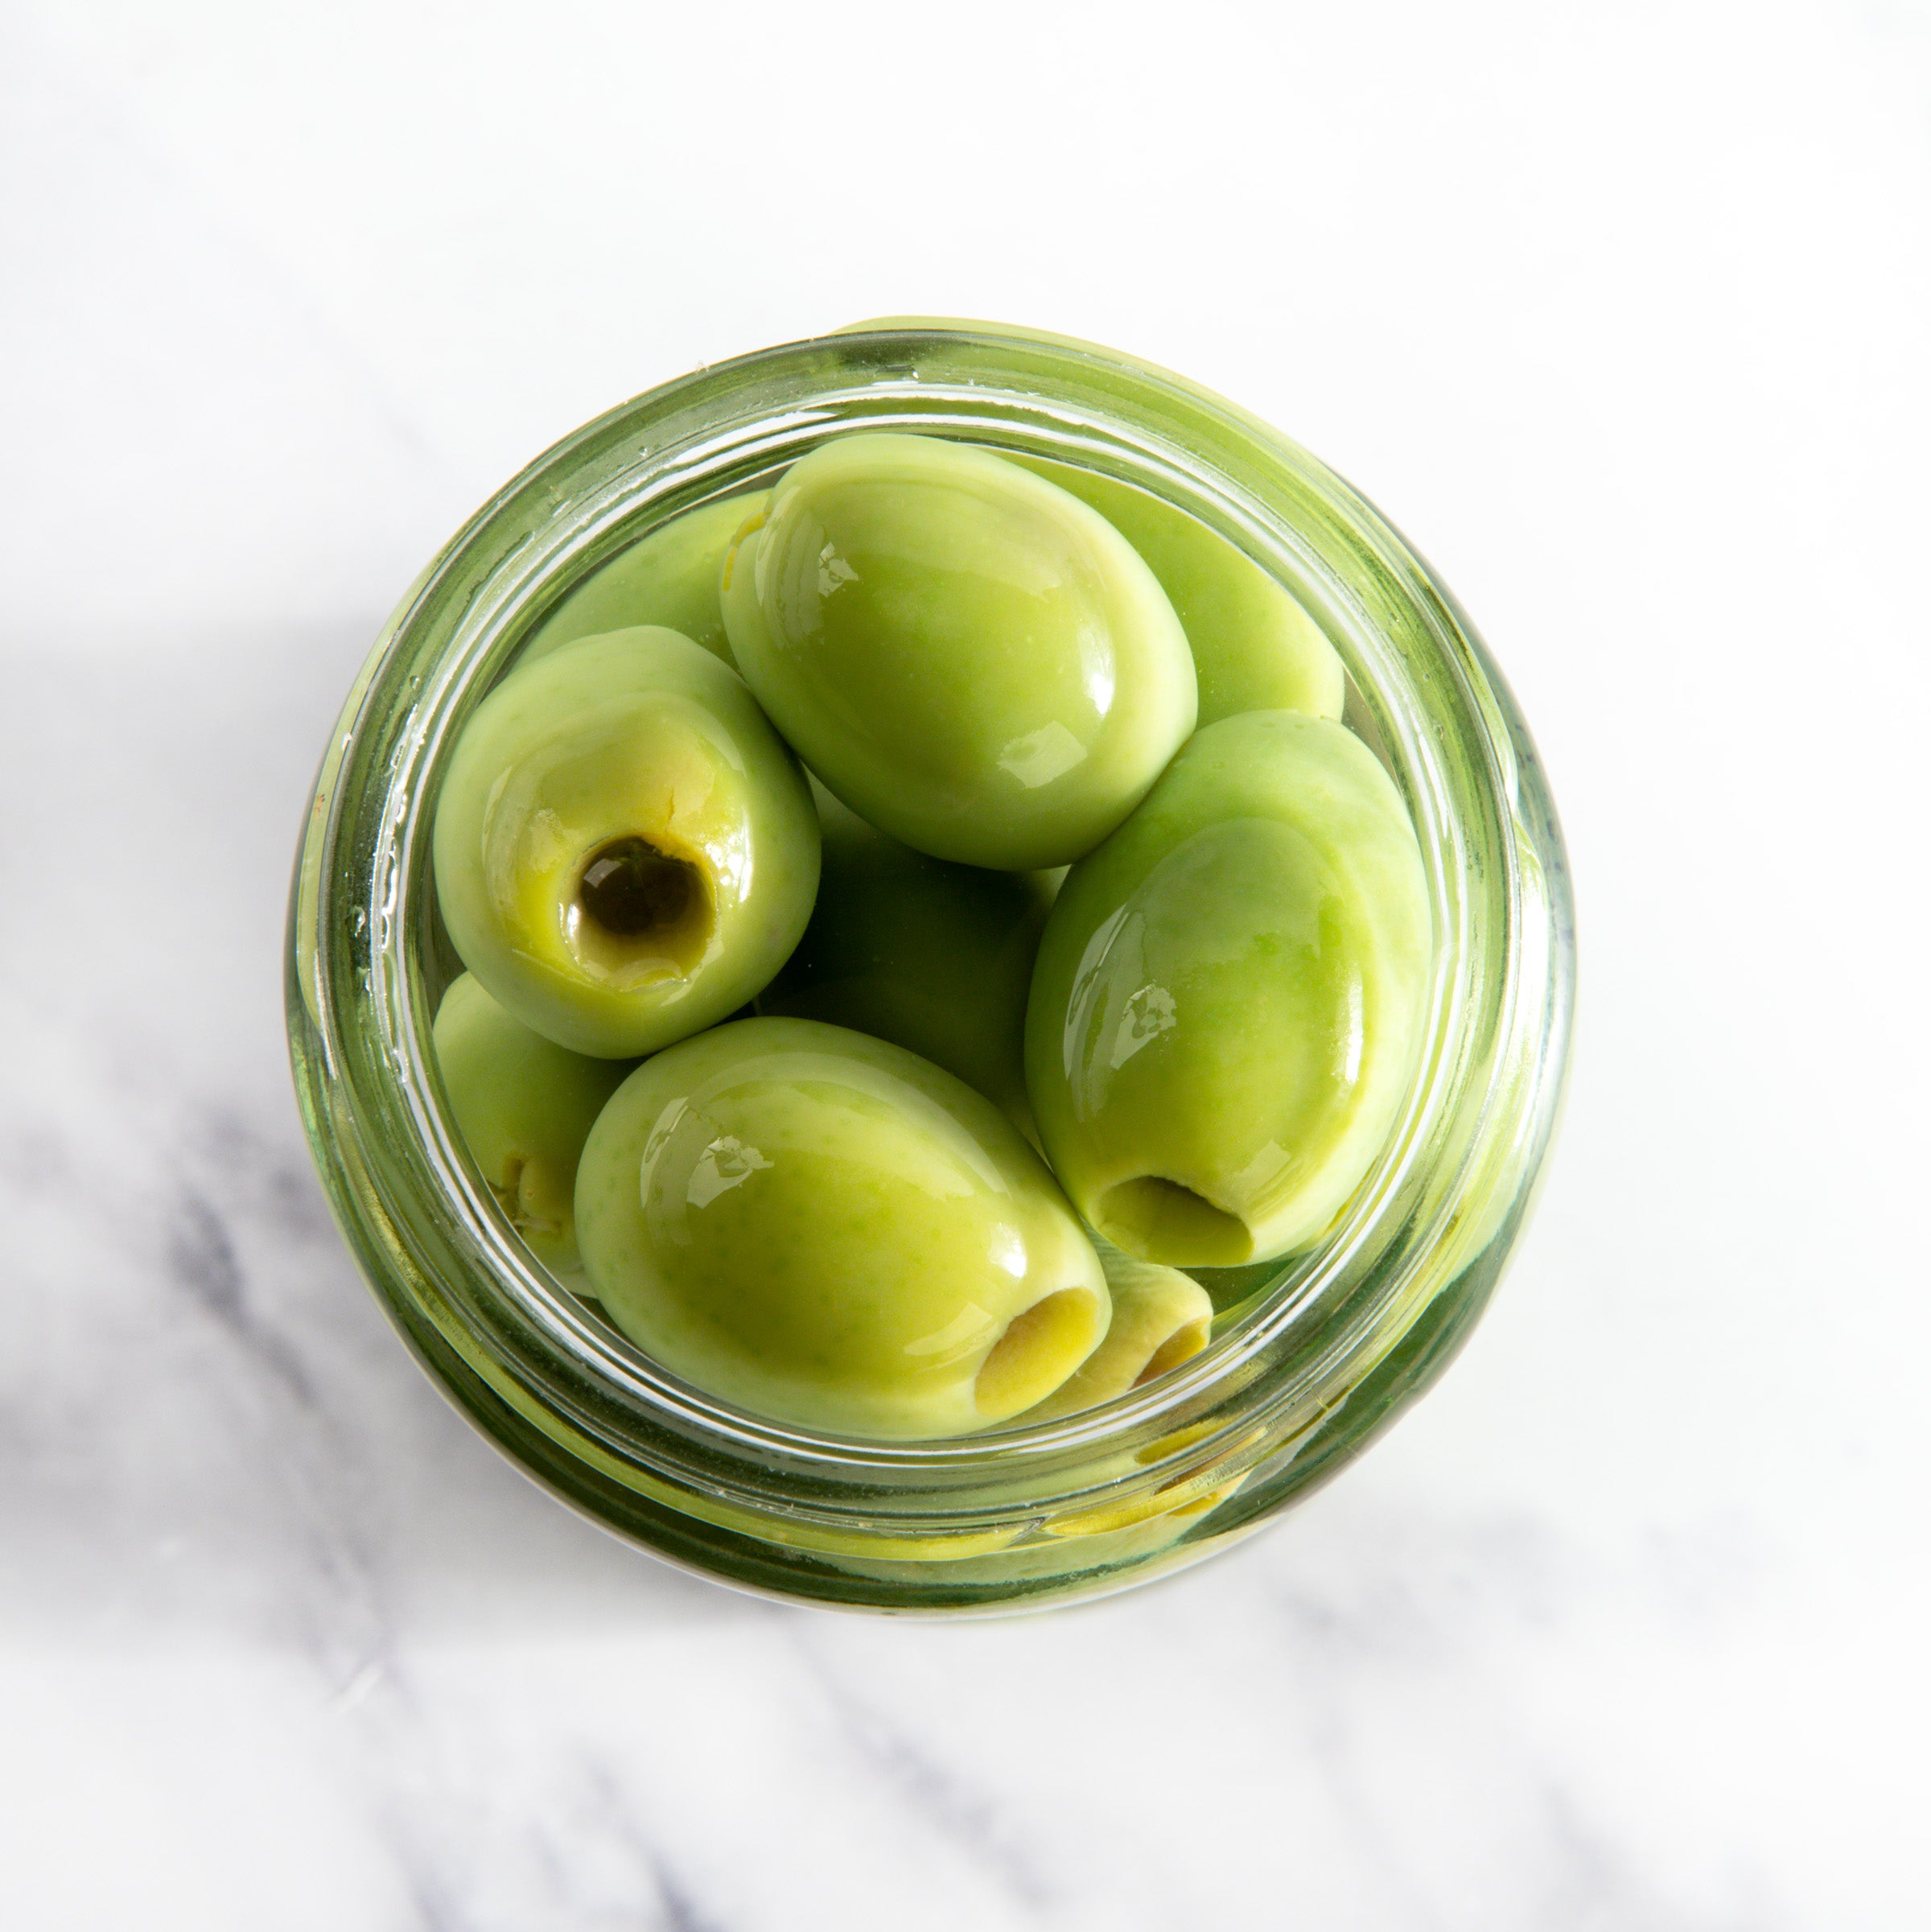 How to Easily Slice Whole Olives